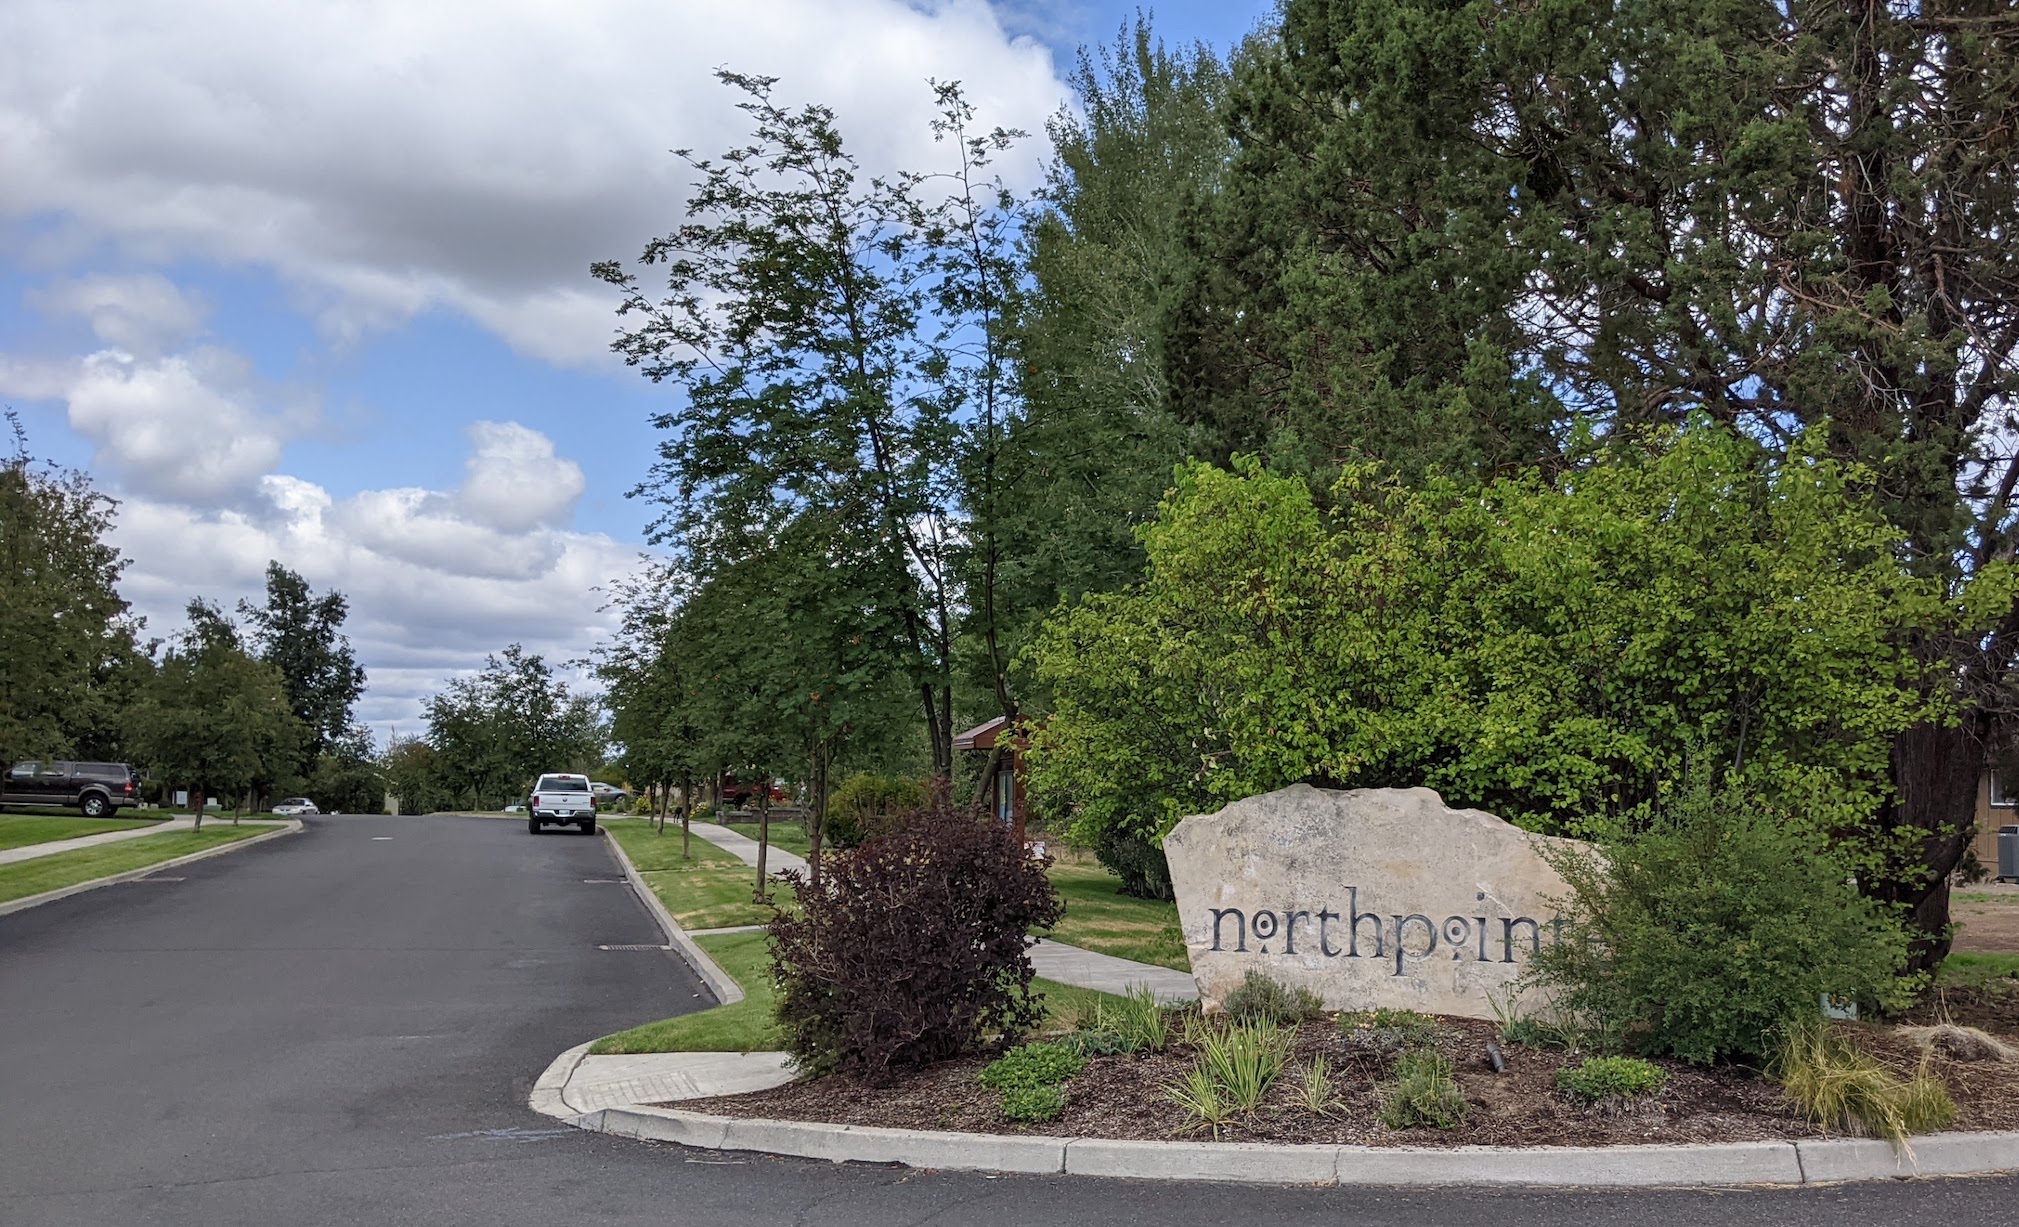 Northpointe sign